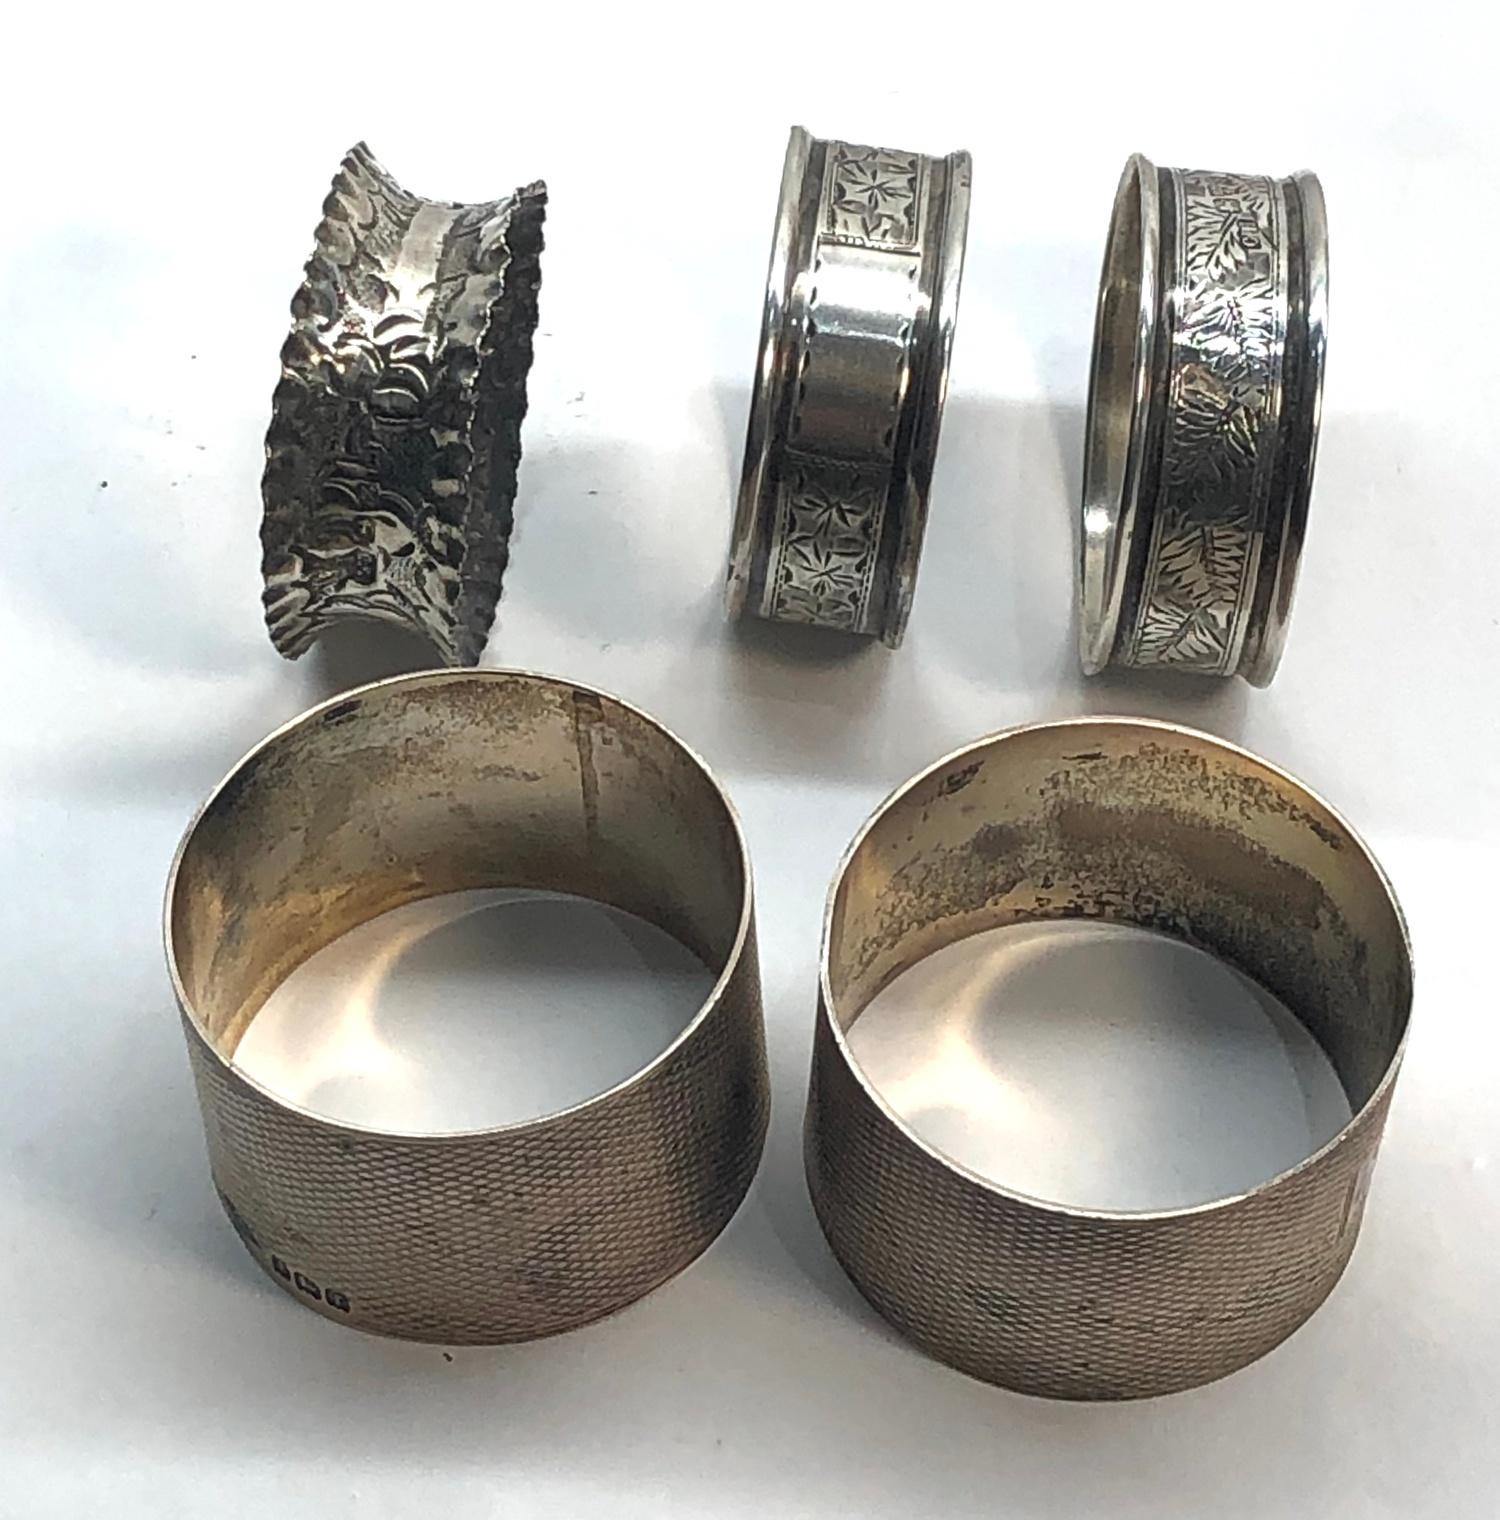 5 antique silver napkin rings all fully hallmarked two by charles horner - Image 2 of 6